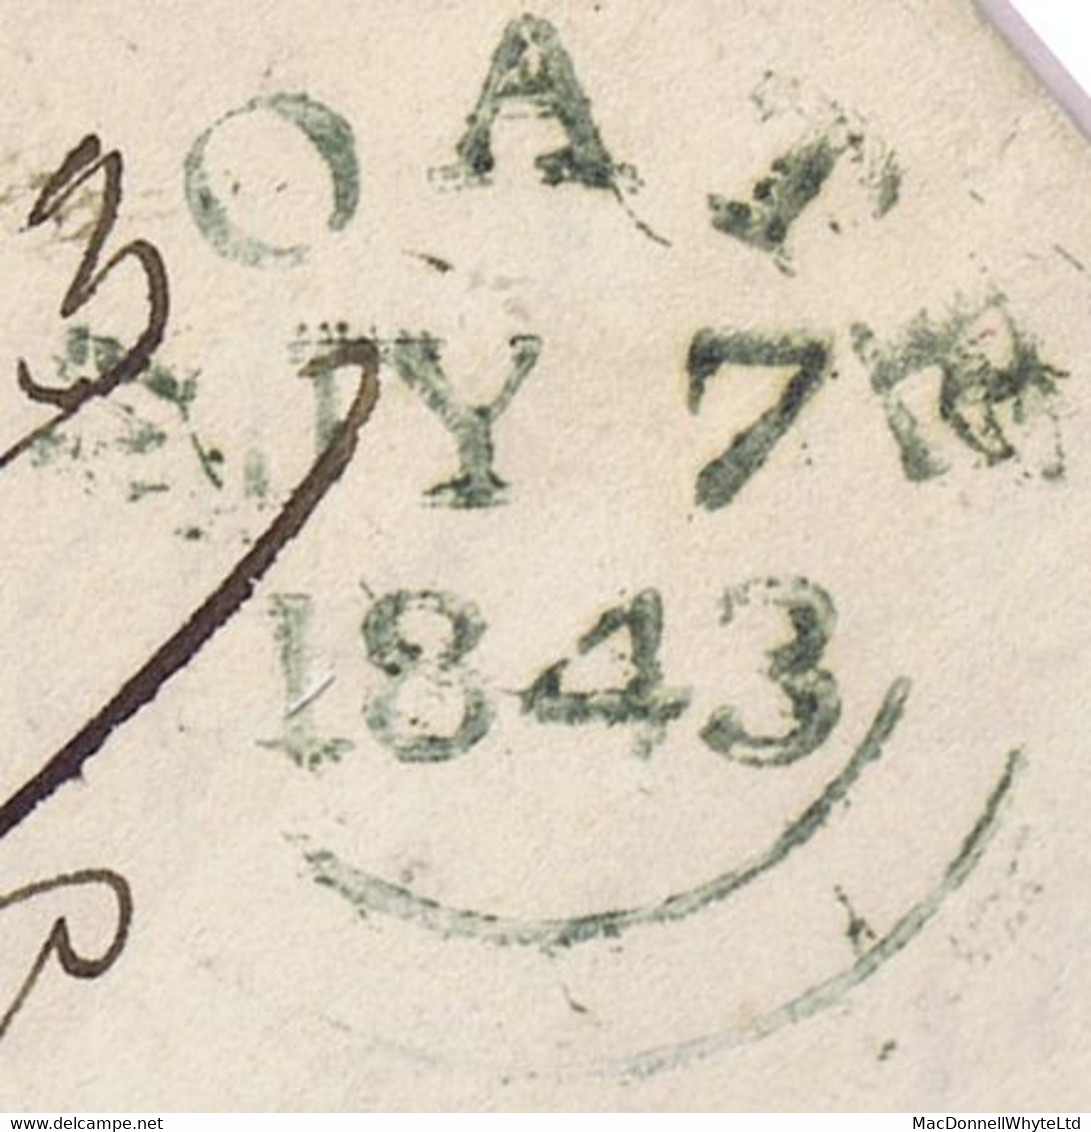 Ireland Westmeath Uniform Penny Post 1844 Cover Streamstown To Dublin Prepaid "1" With MOATE JY 7 1843 Cds In Green - Prephilately